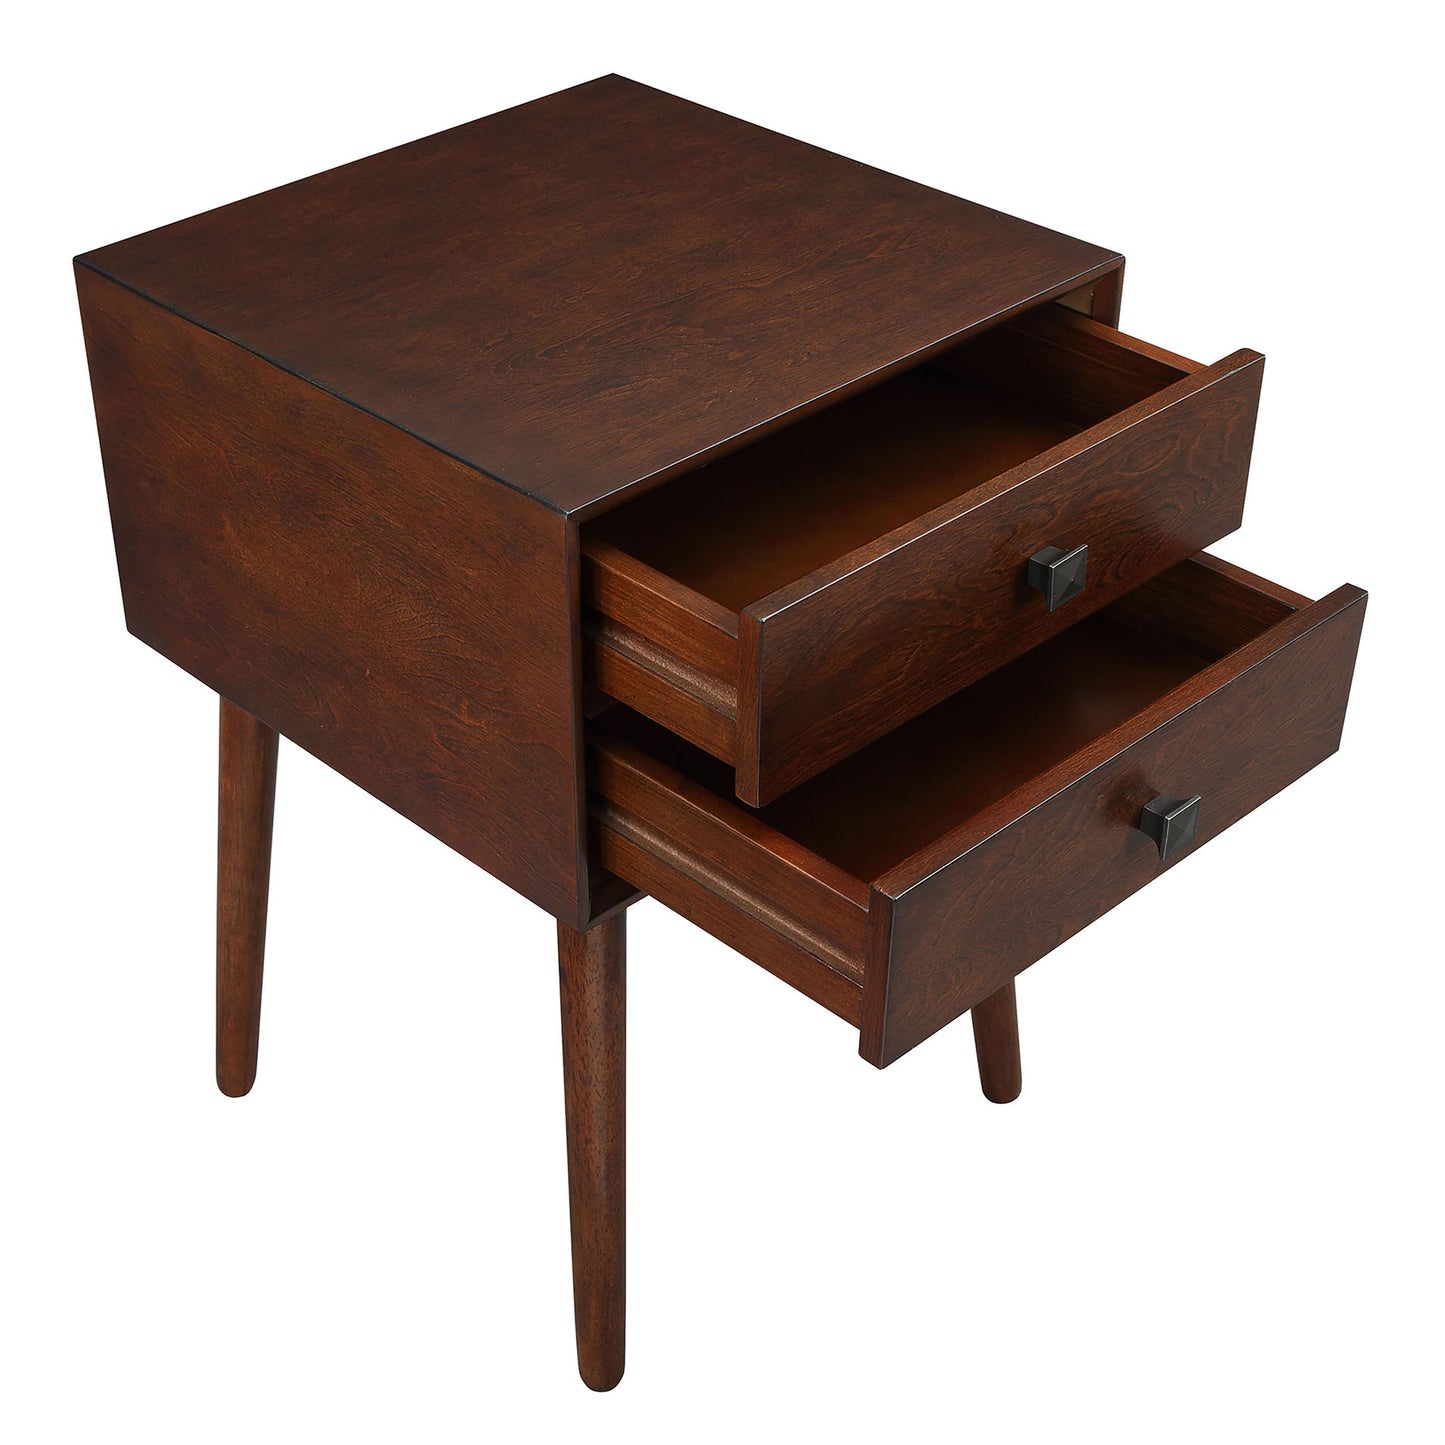 Right angled upper view of a modern espresso two-drawer compact nightstand with splayed legs and drawers open on a white background